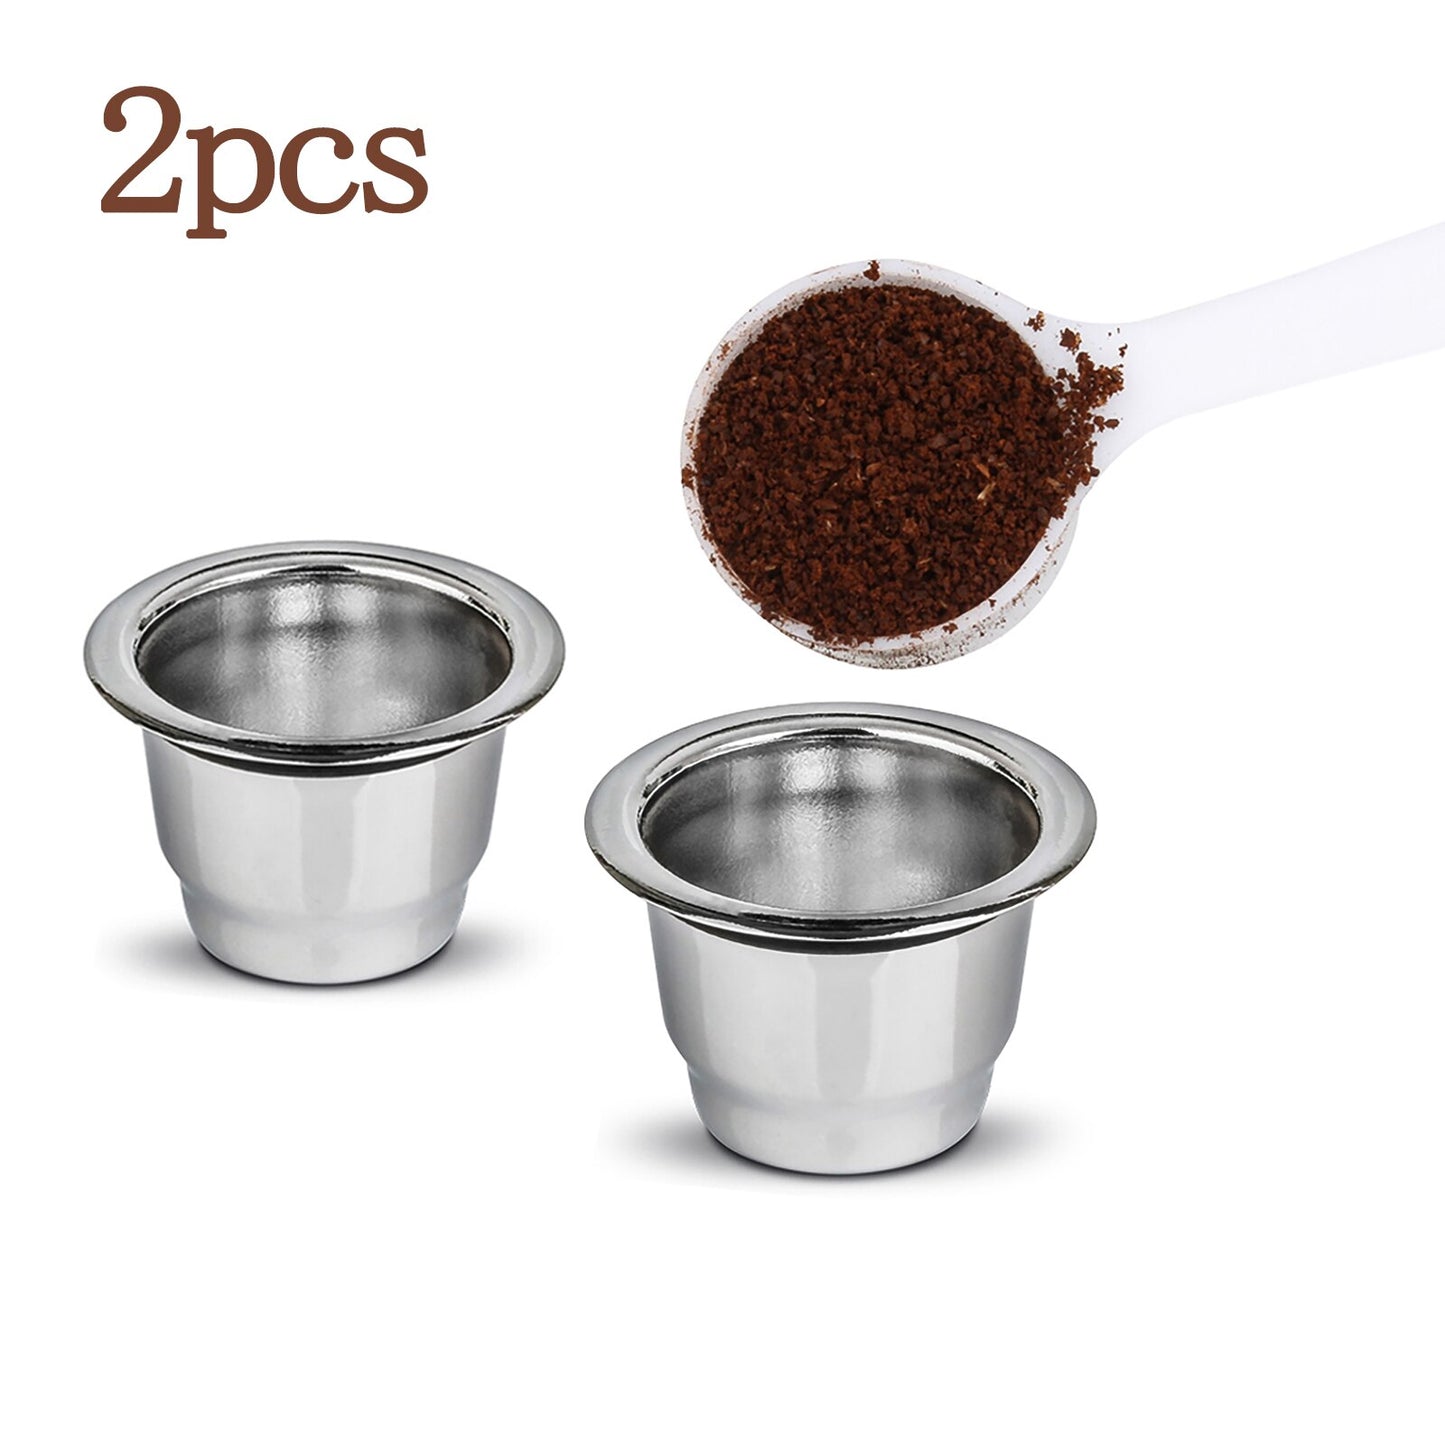 Stainless Steel Refillable Coffee Capsule Coffee Filter